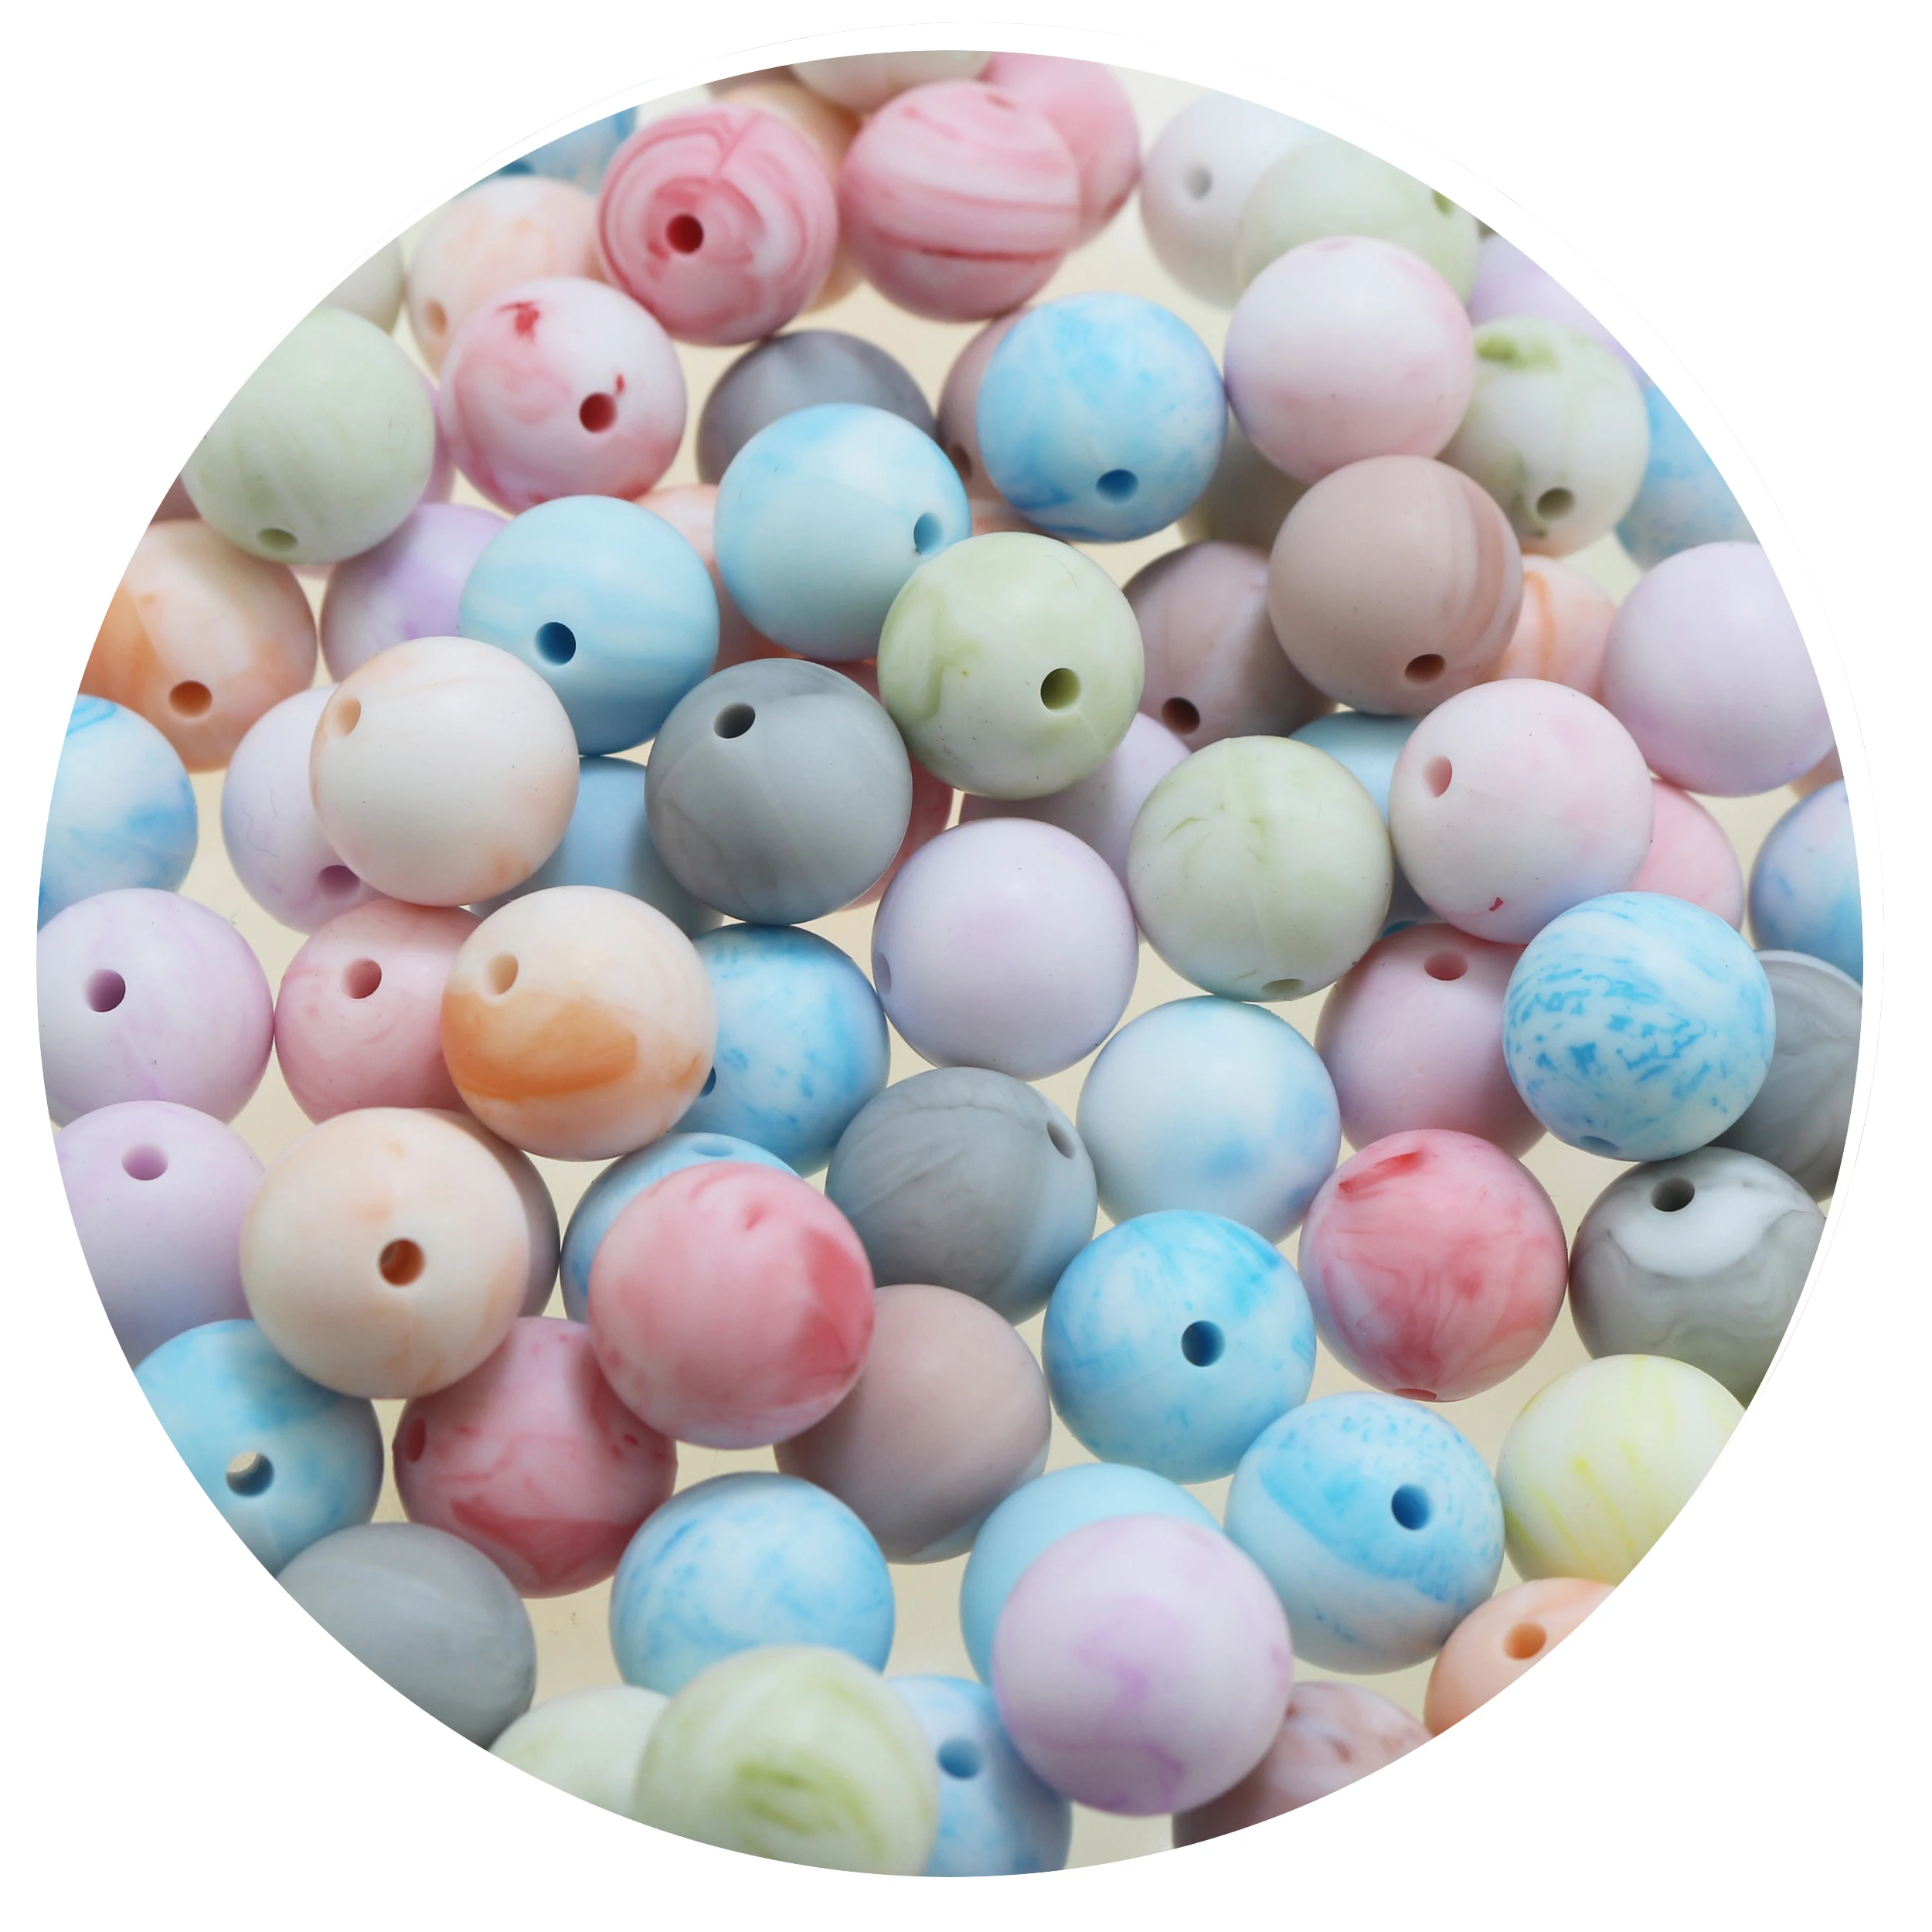 100pcs/Lot Round Silicone Beads Round Loose Ball for Teething Necklace Soft Pearl for baby Teether BPA Safe images - 6